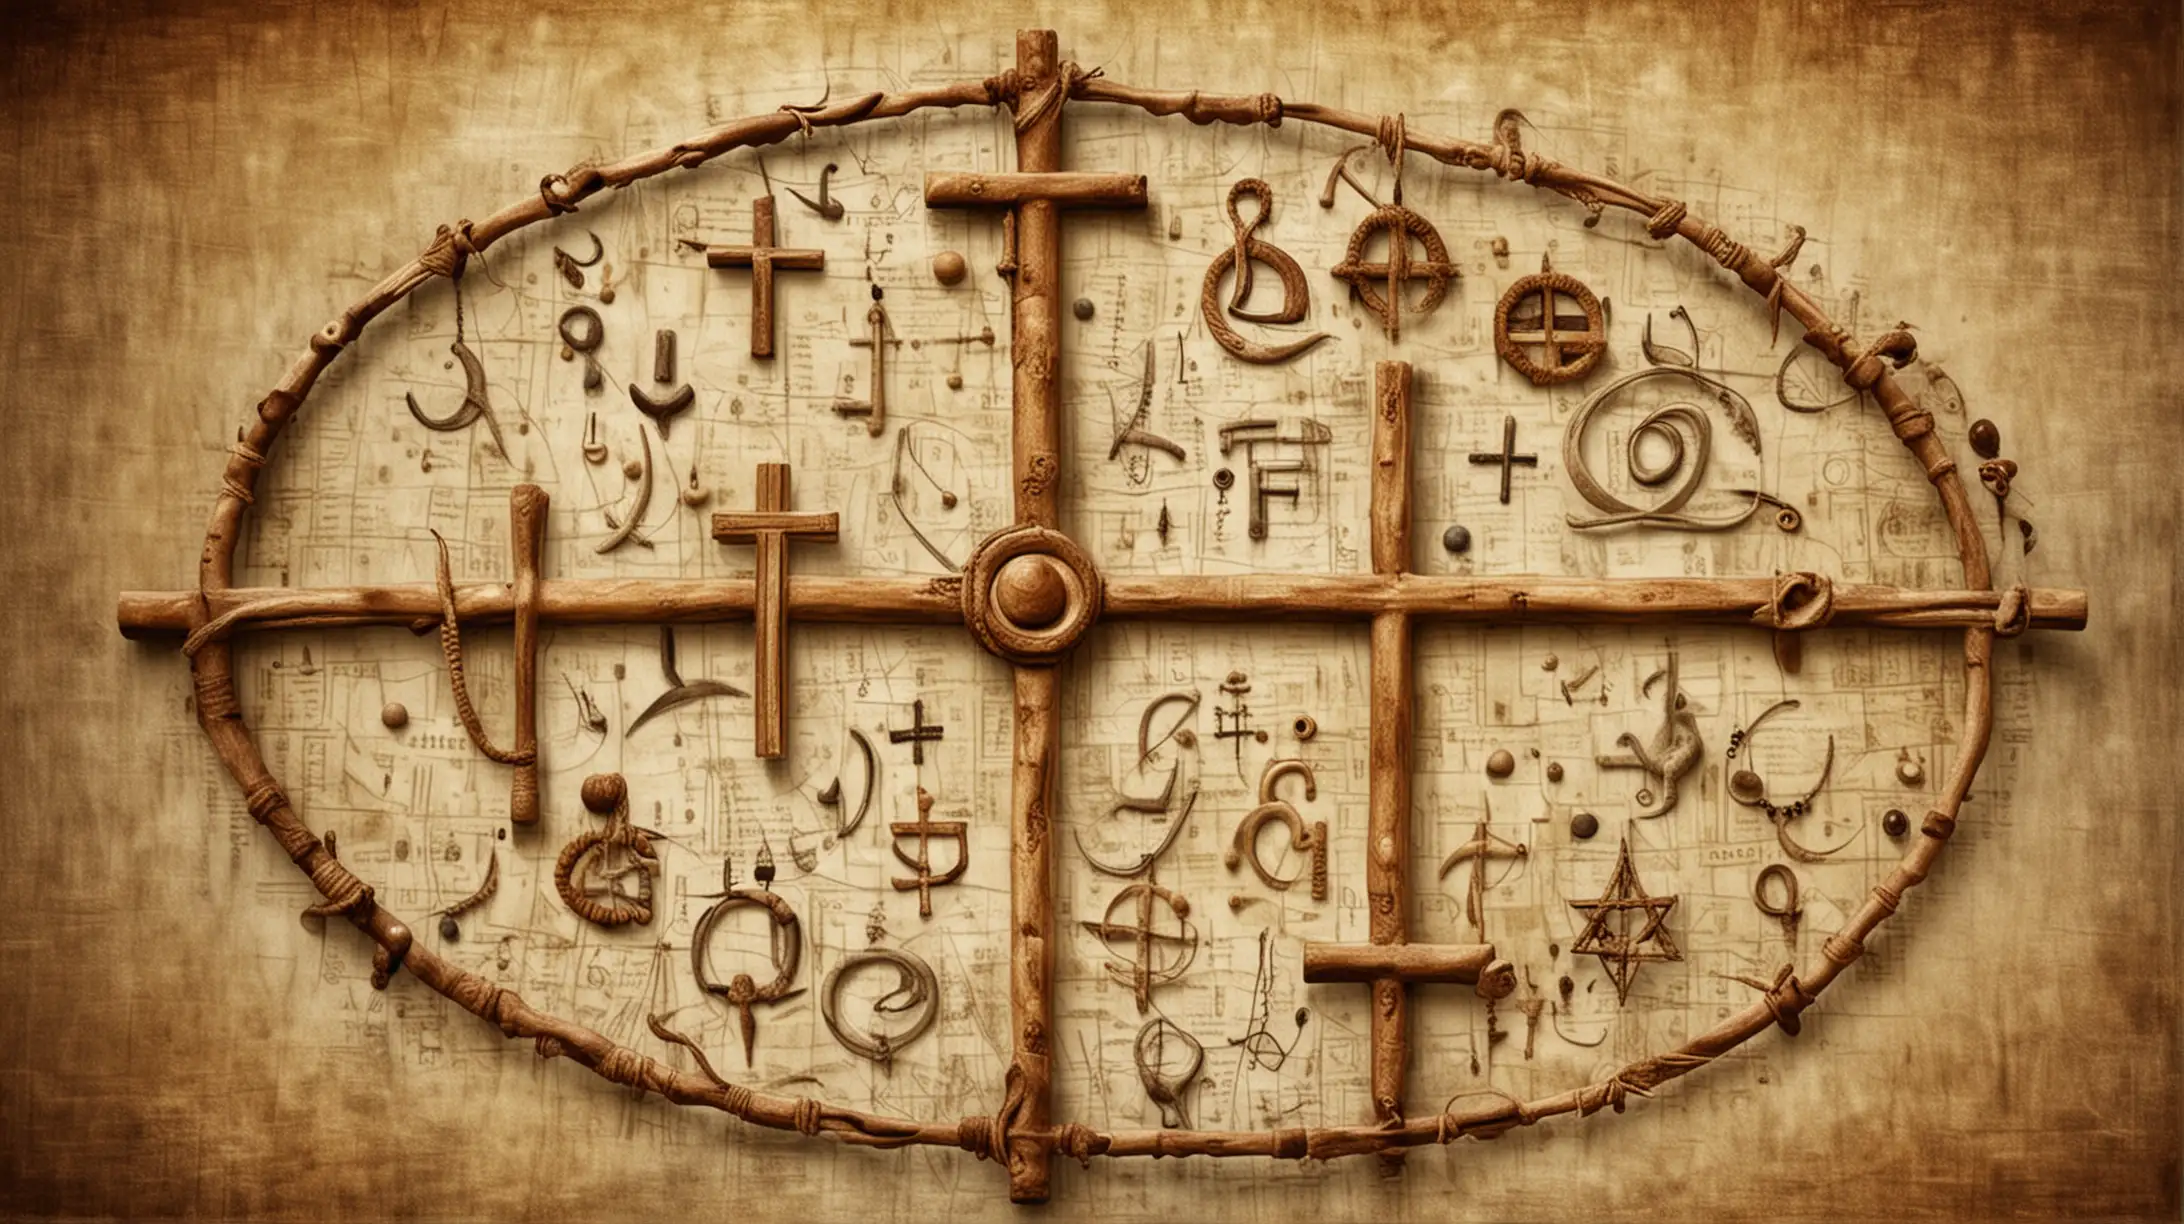 Abstract Picture of Global Religious Symbols and Morality